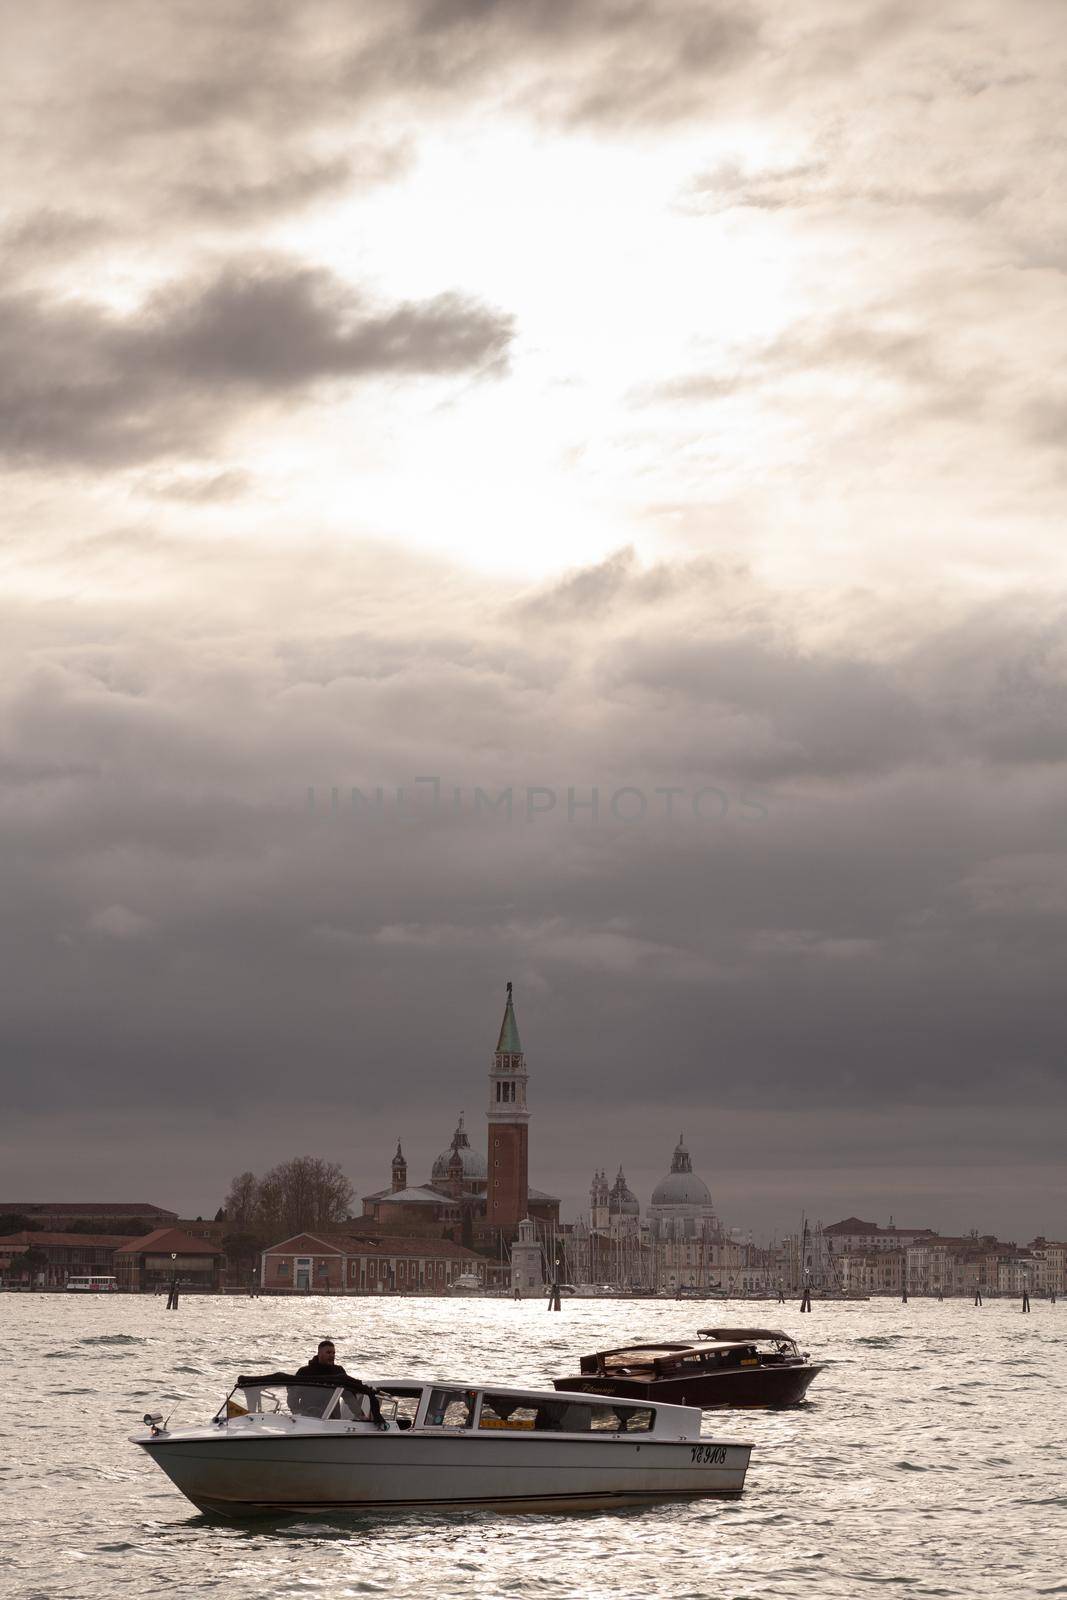 View of the St. Giorgio church on the cloudy sky by bepsimage